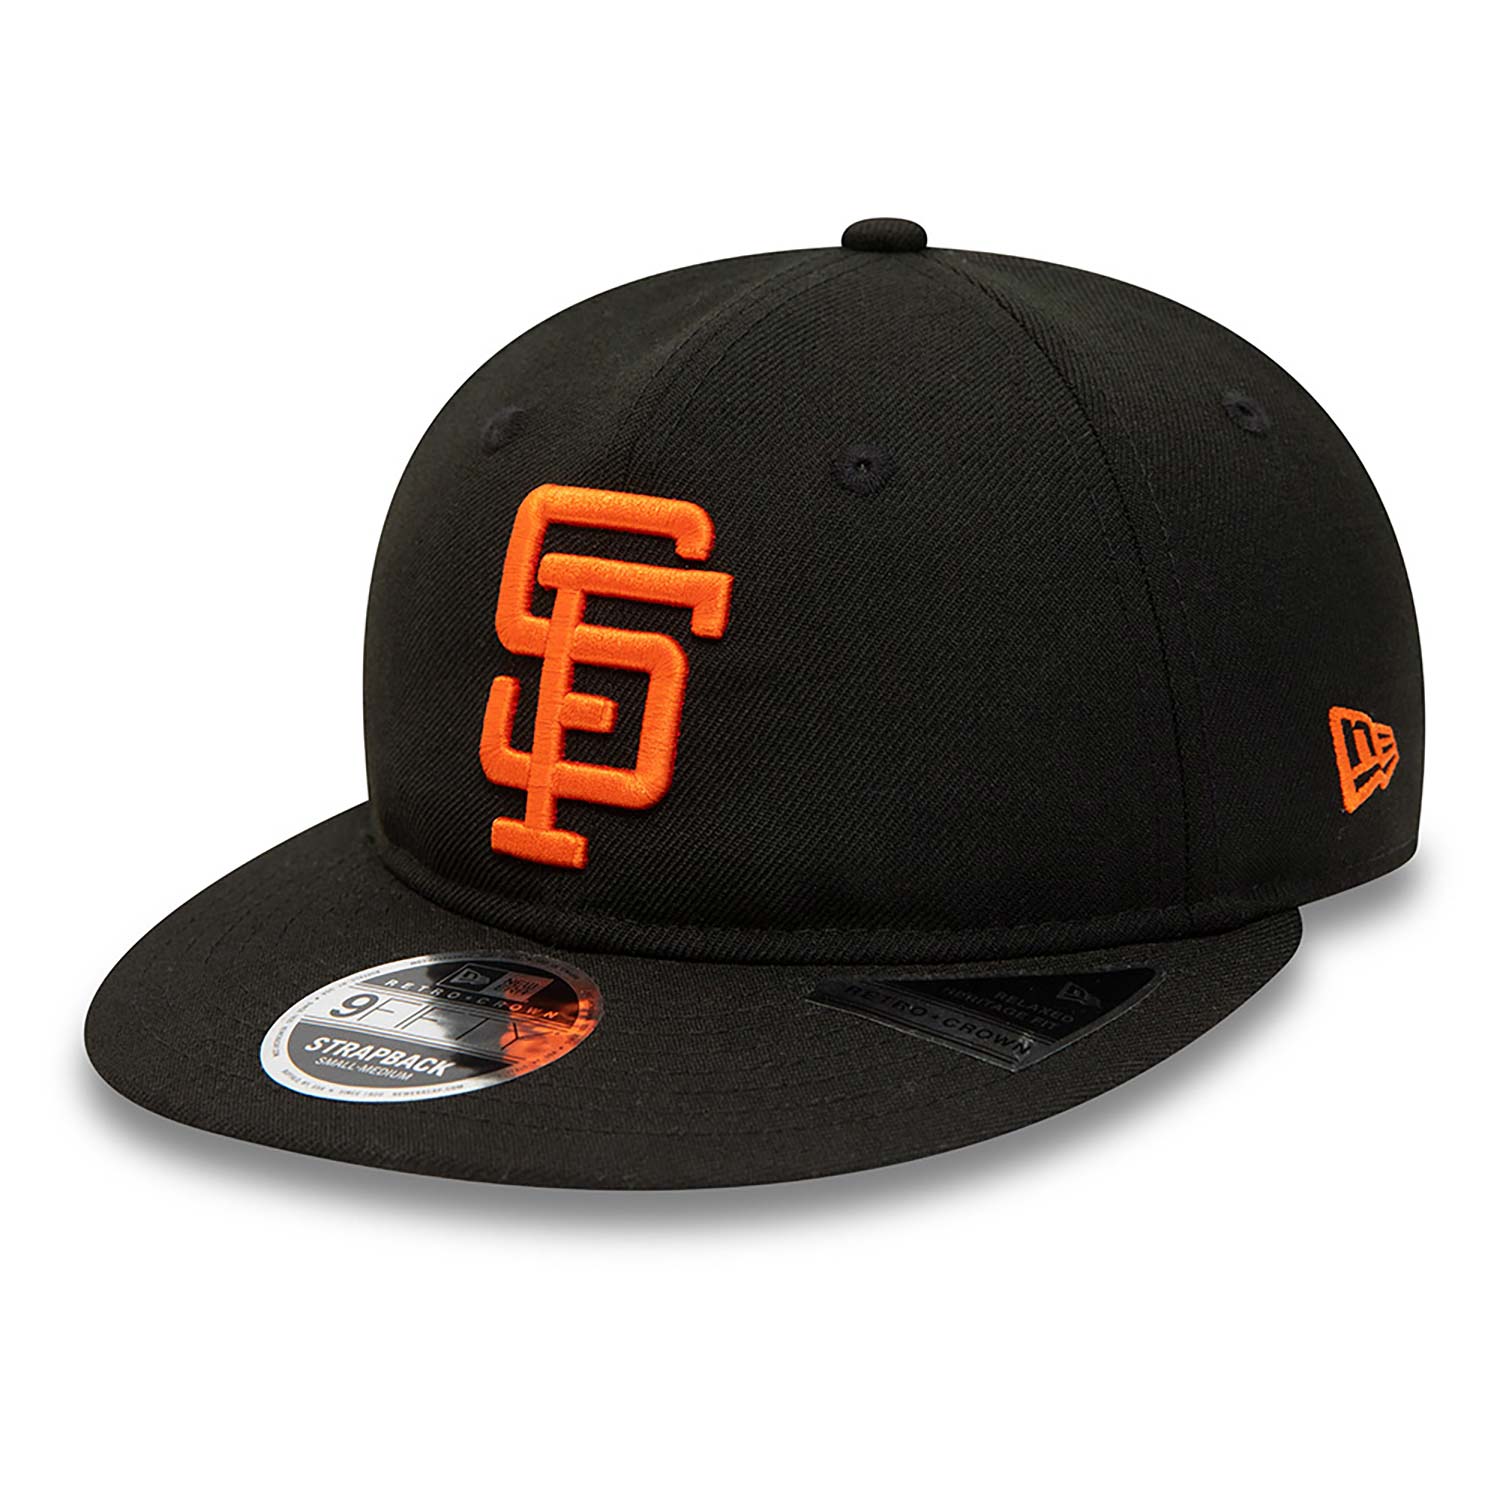 Official New Era Cooperstown Multi Patch San Francisco Giants